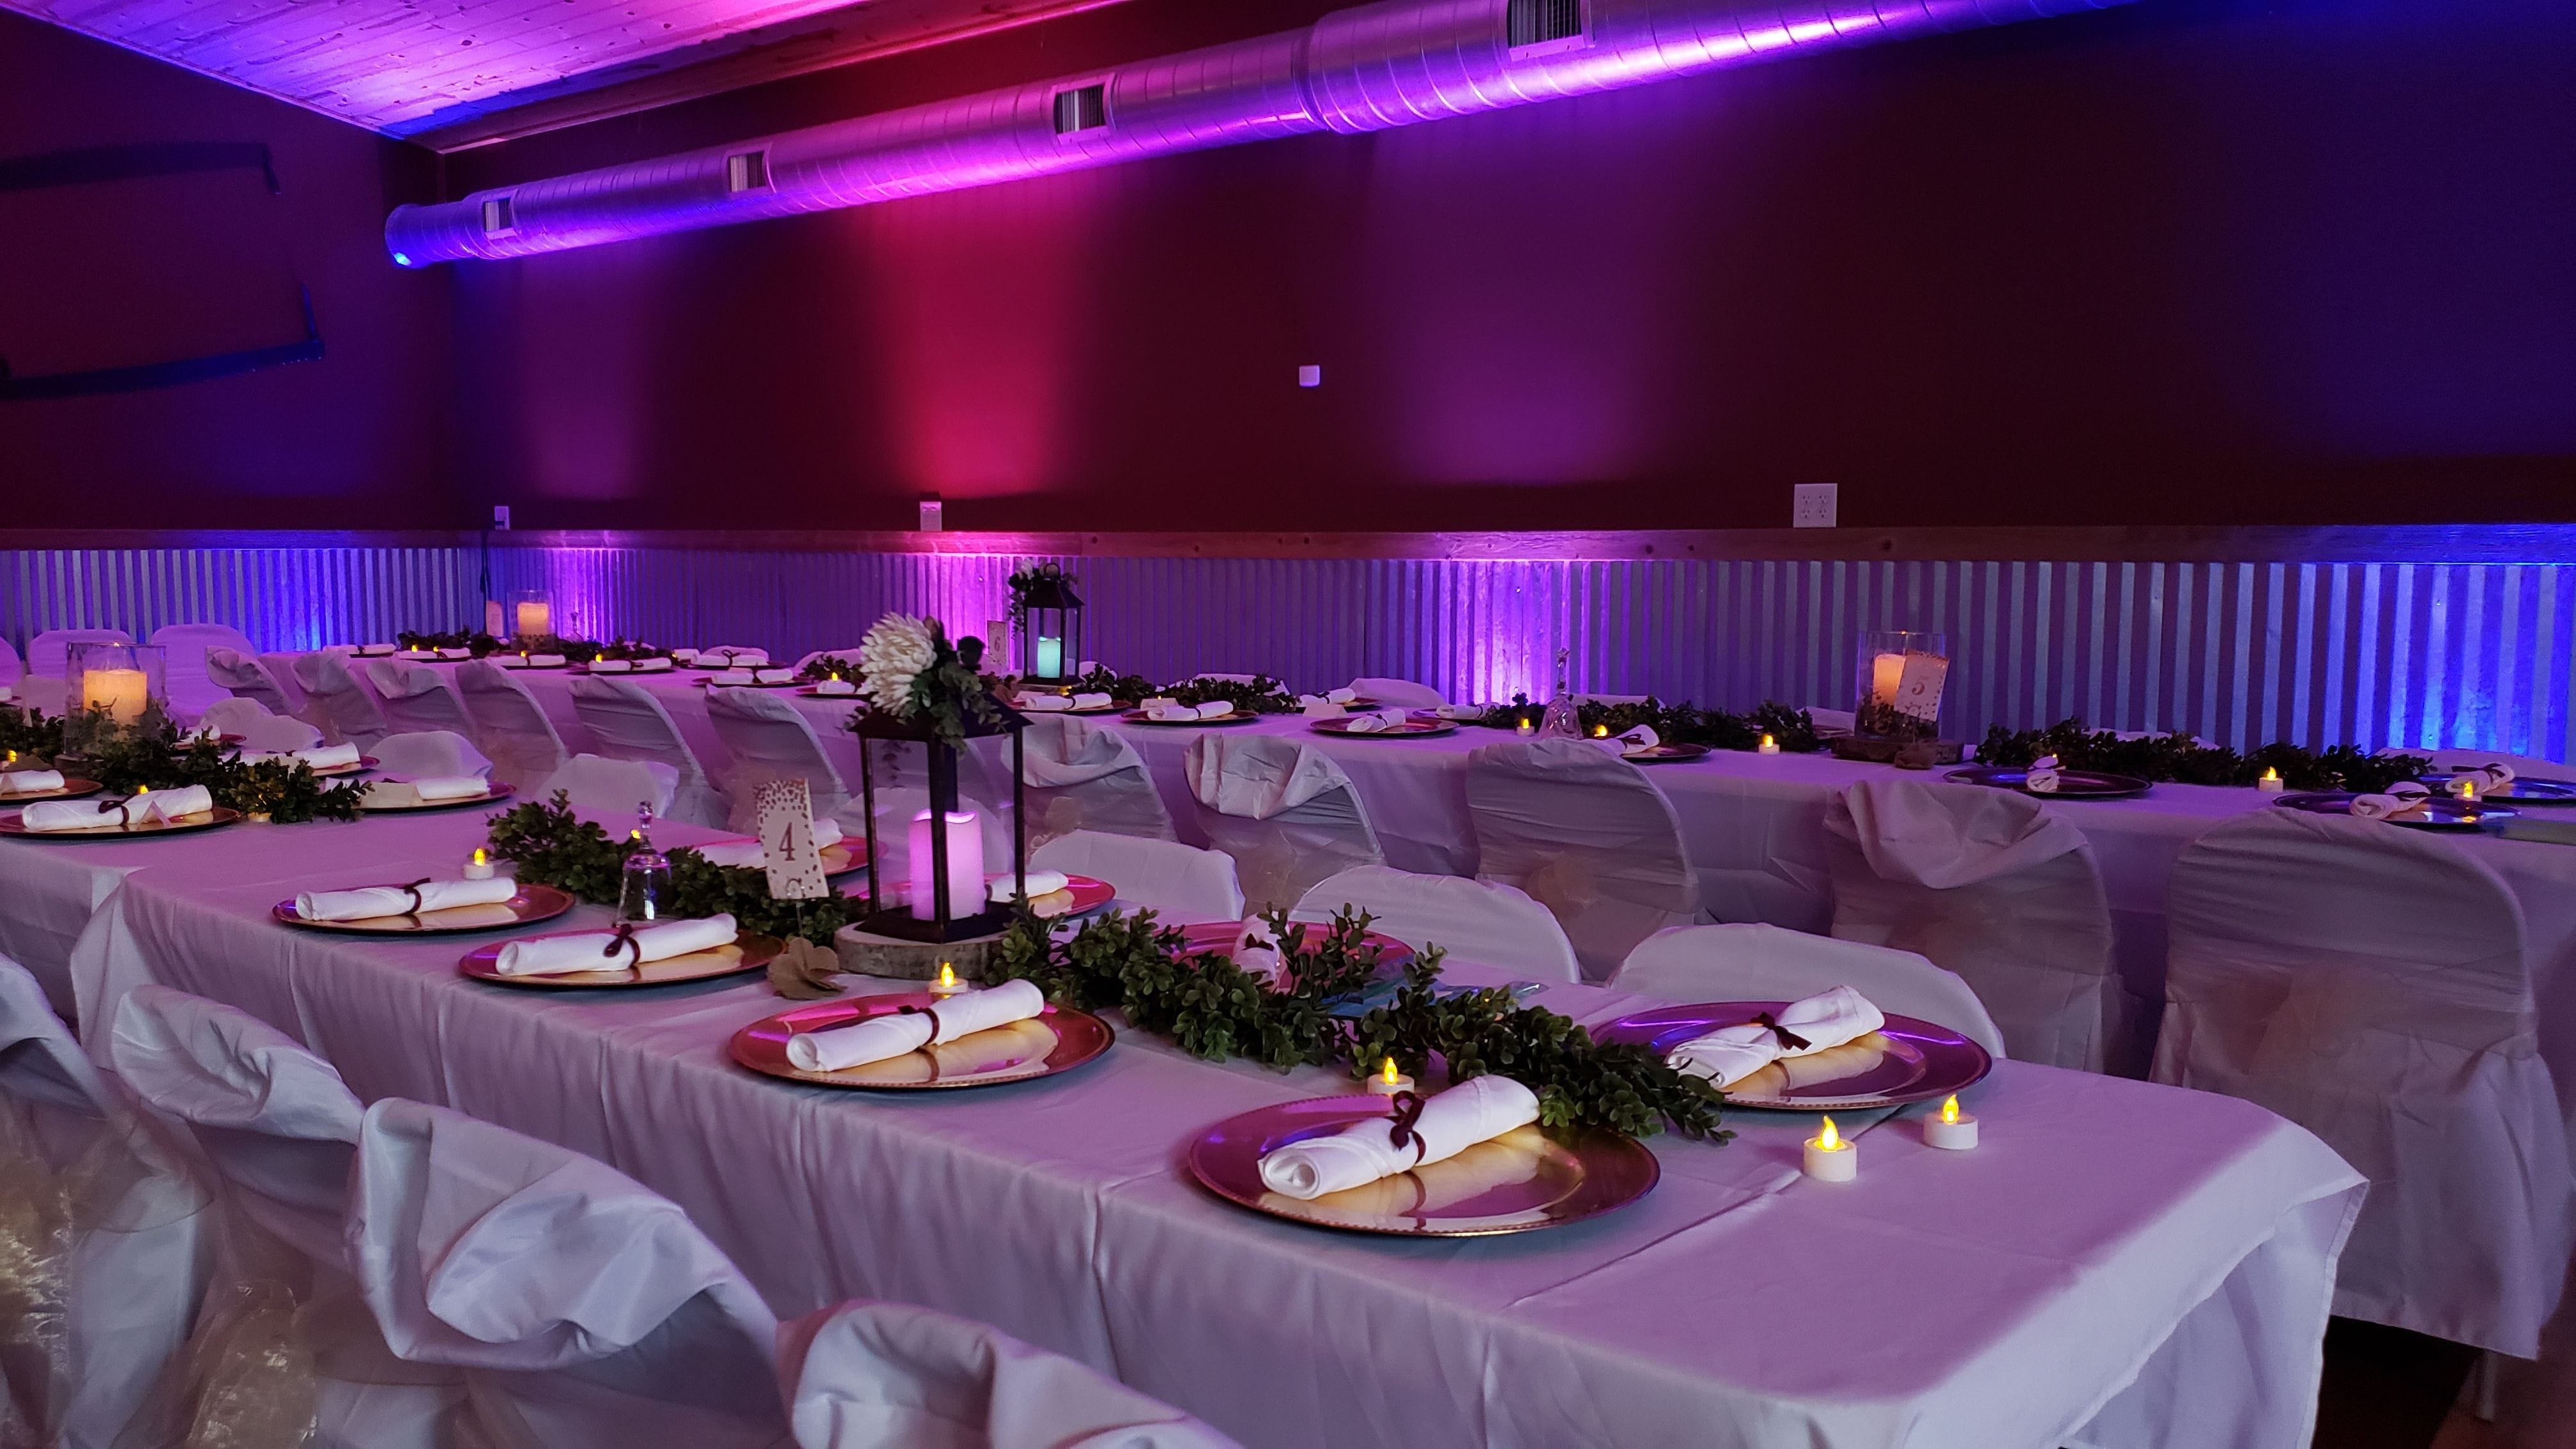 Wedding lighting at the Buffalo House. Up lighting in blue, lavender and magenta.